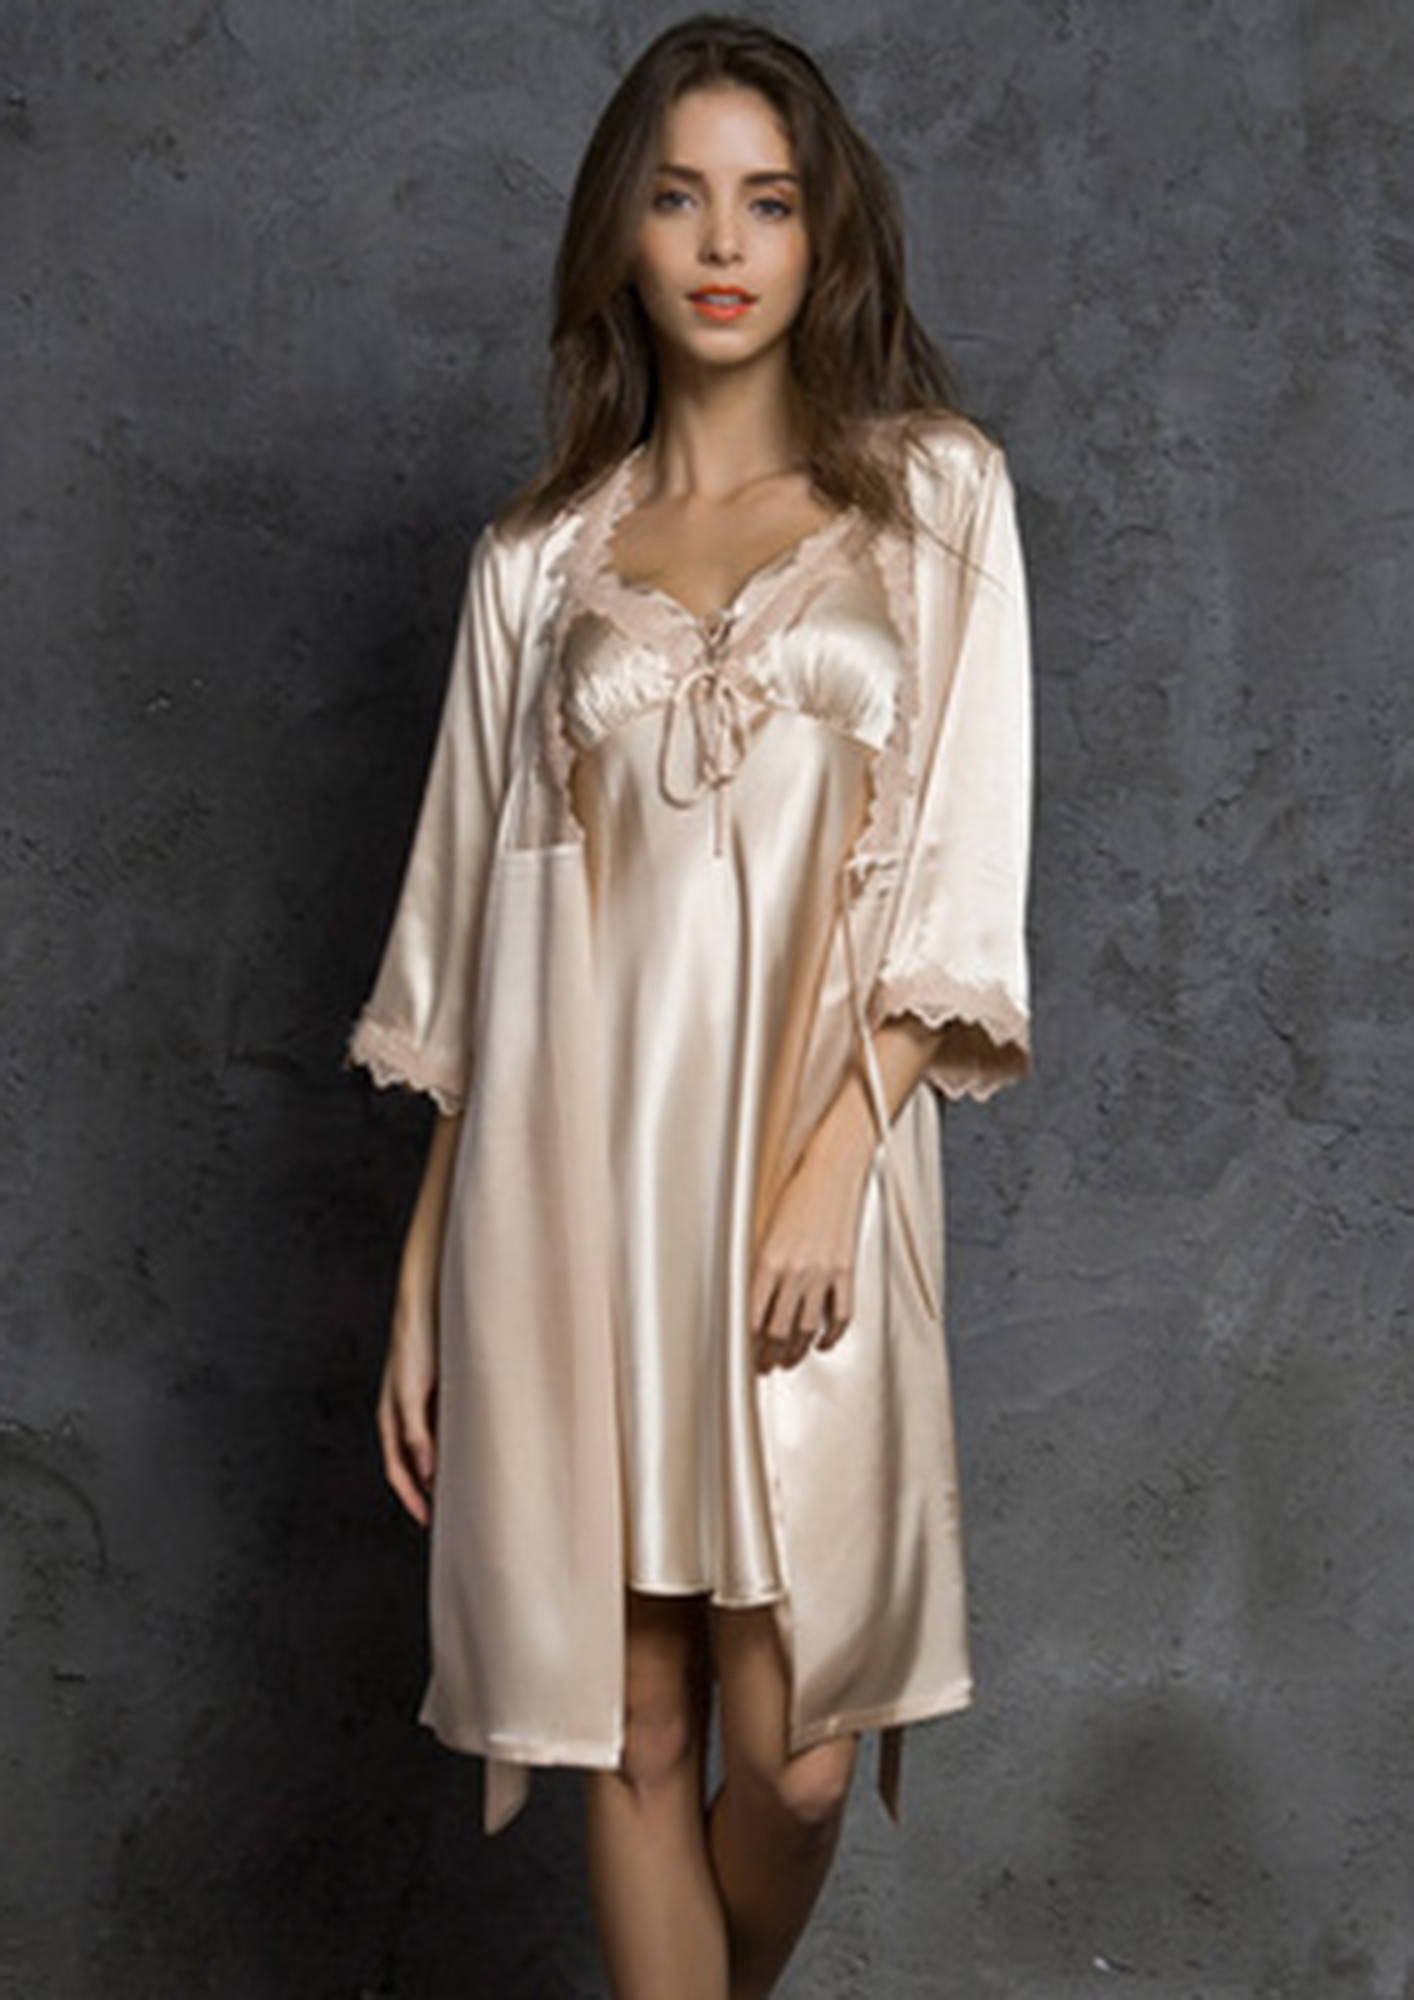 A LITTLE TALKATIVE CCHAMPAGNE NIGHTGOWN